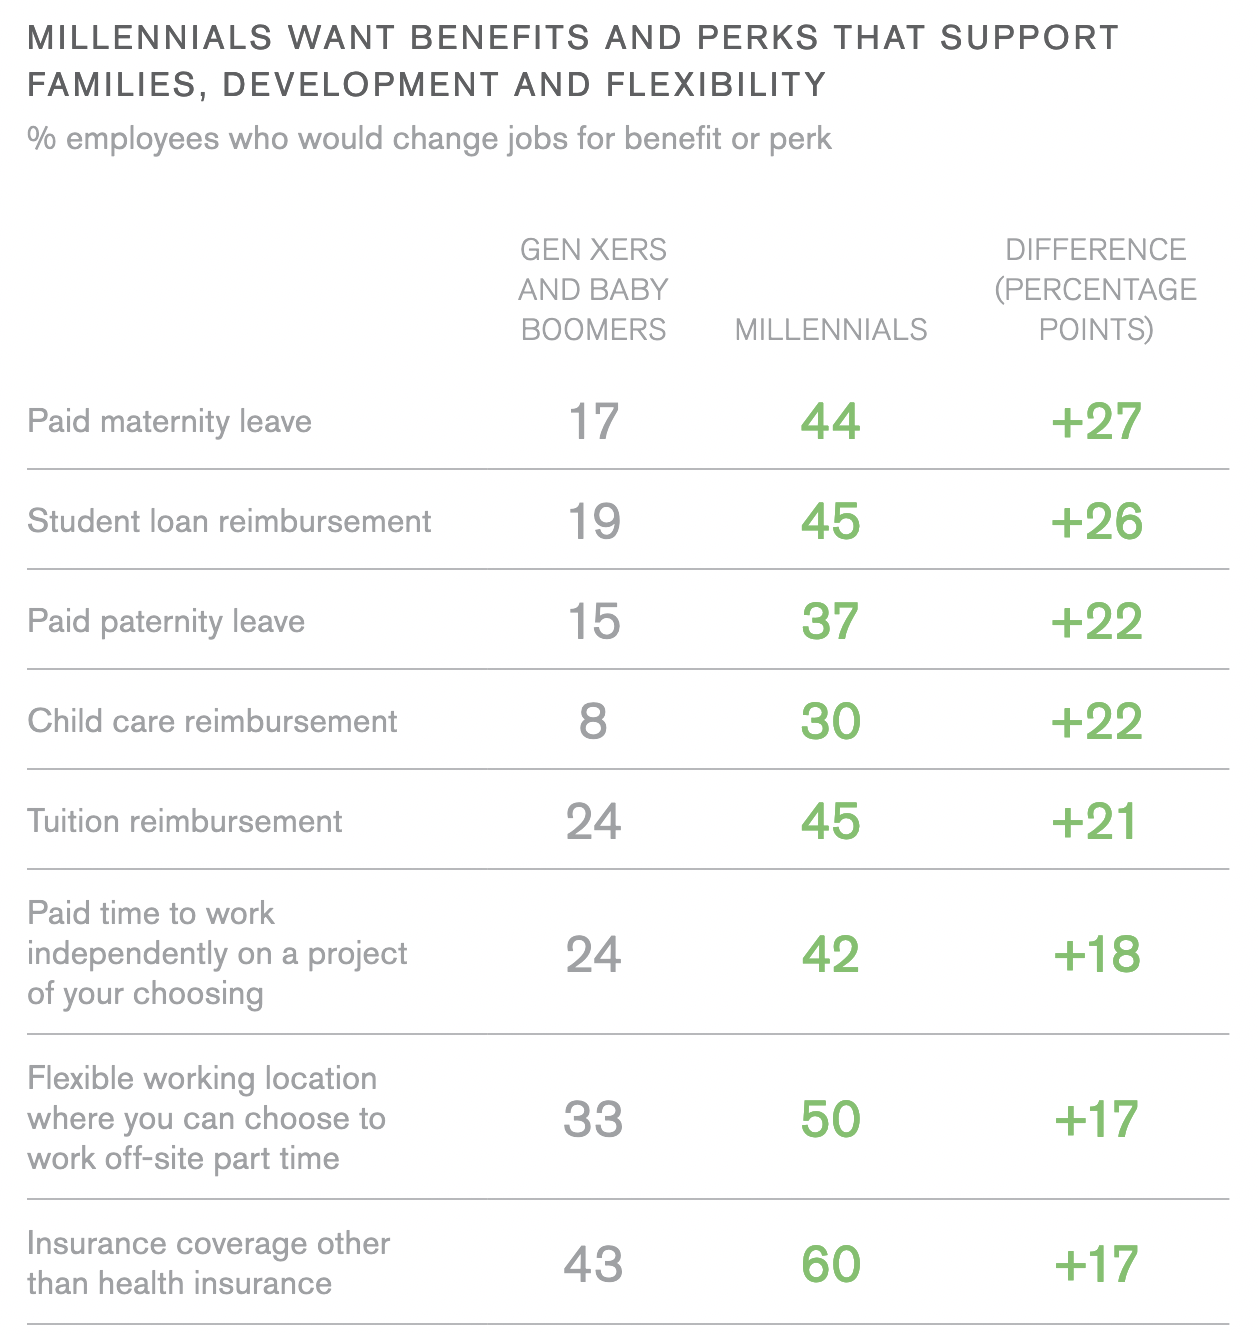 Millennials Want Benefits and Perks That Support Families, Development and Flexibility